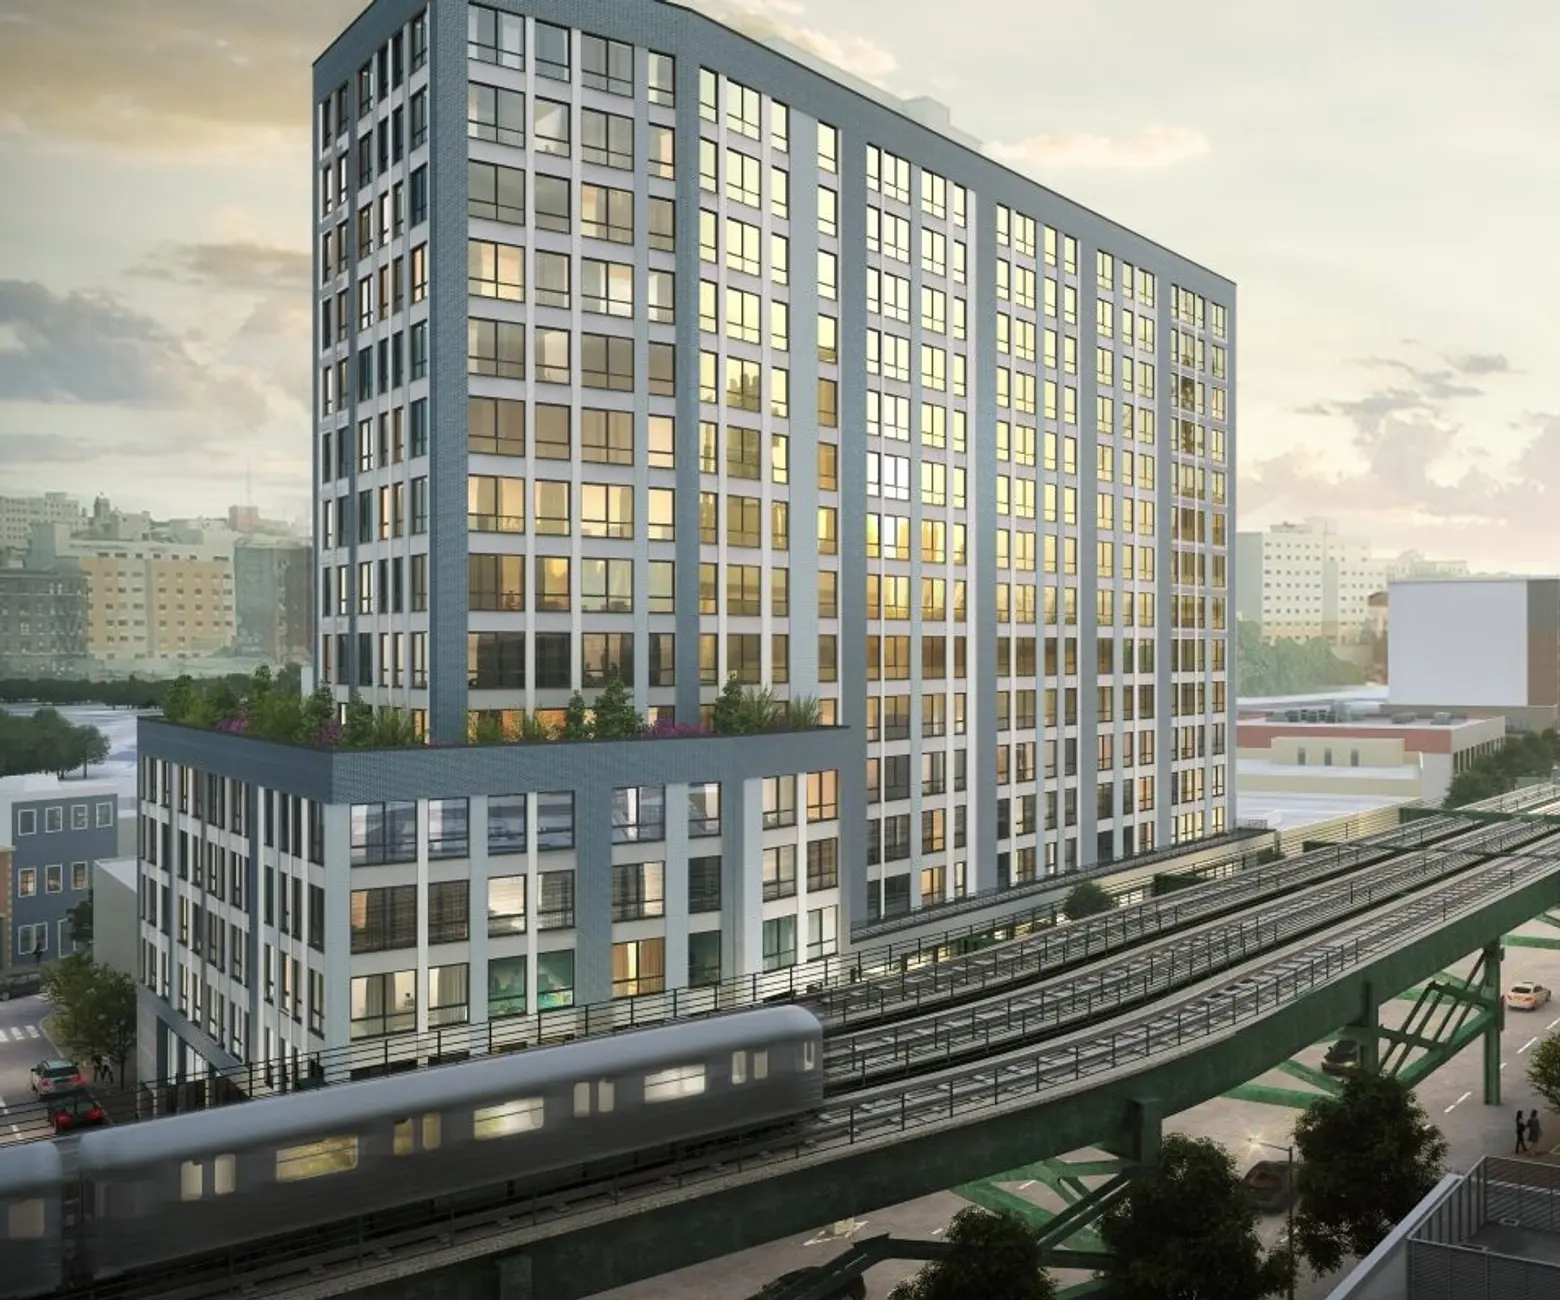 Apply for 101 affordable apartments in the Mount Eden section of the Bronx, from $724/month